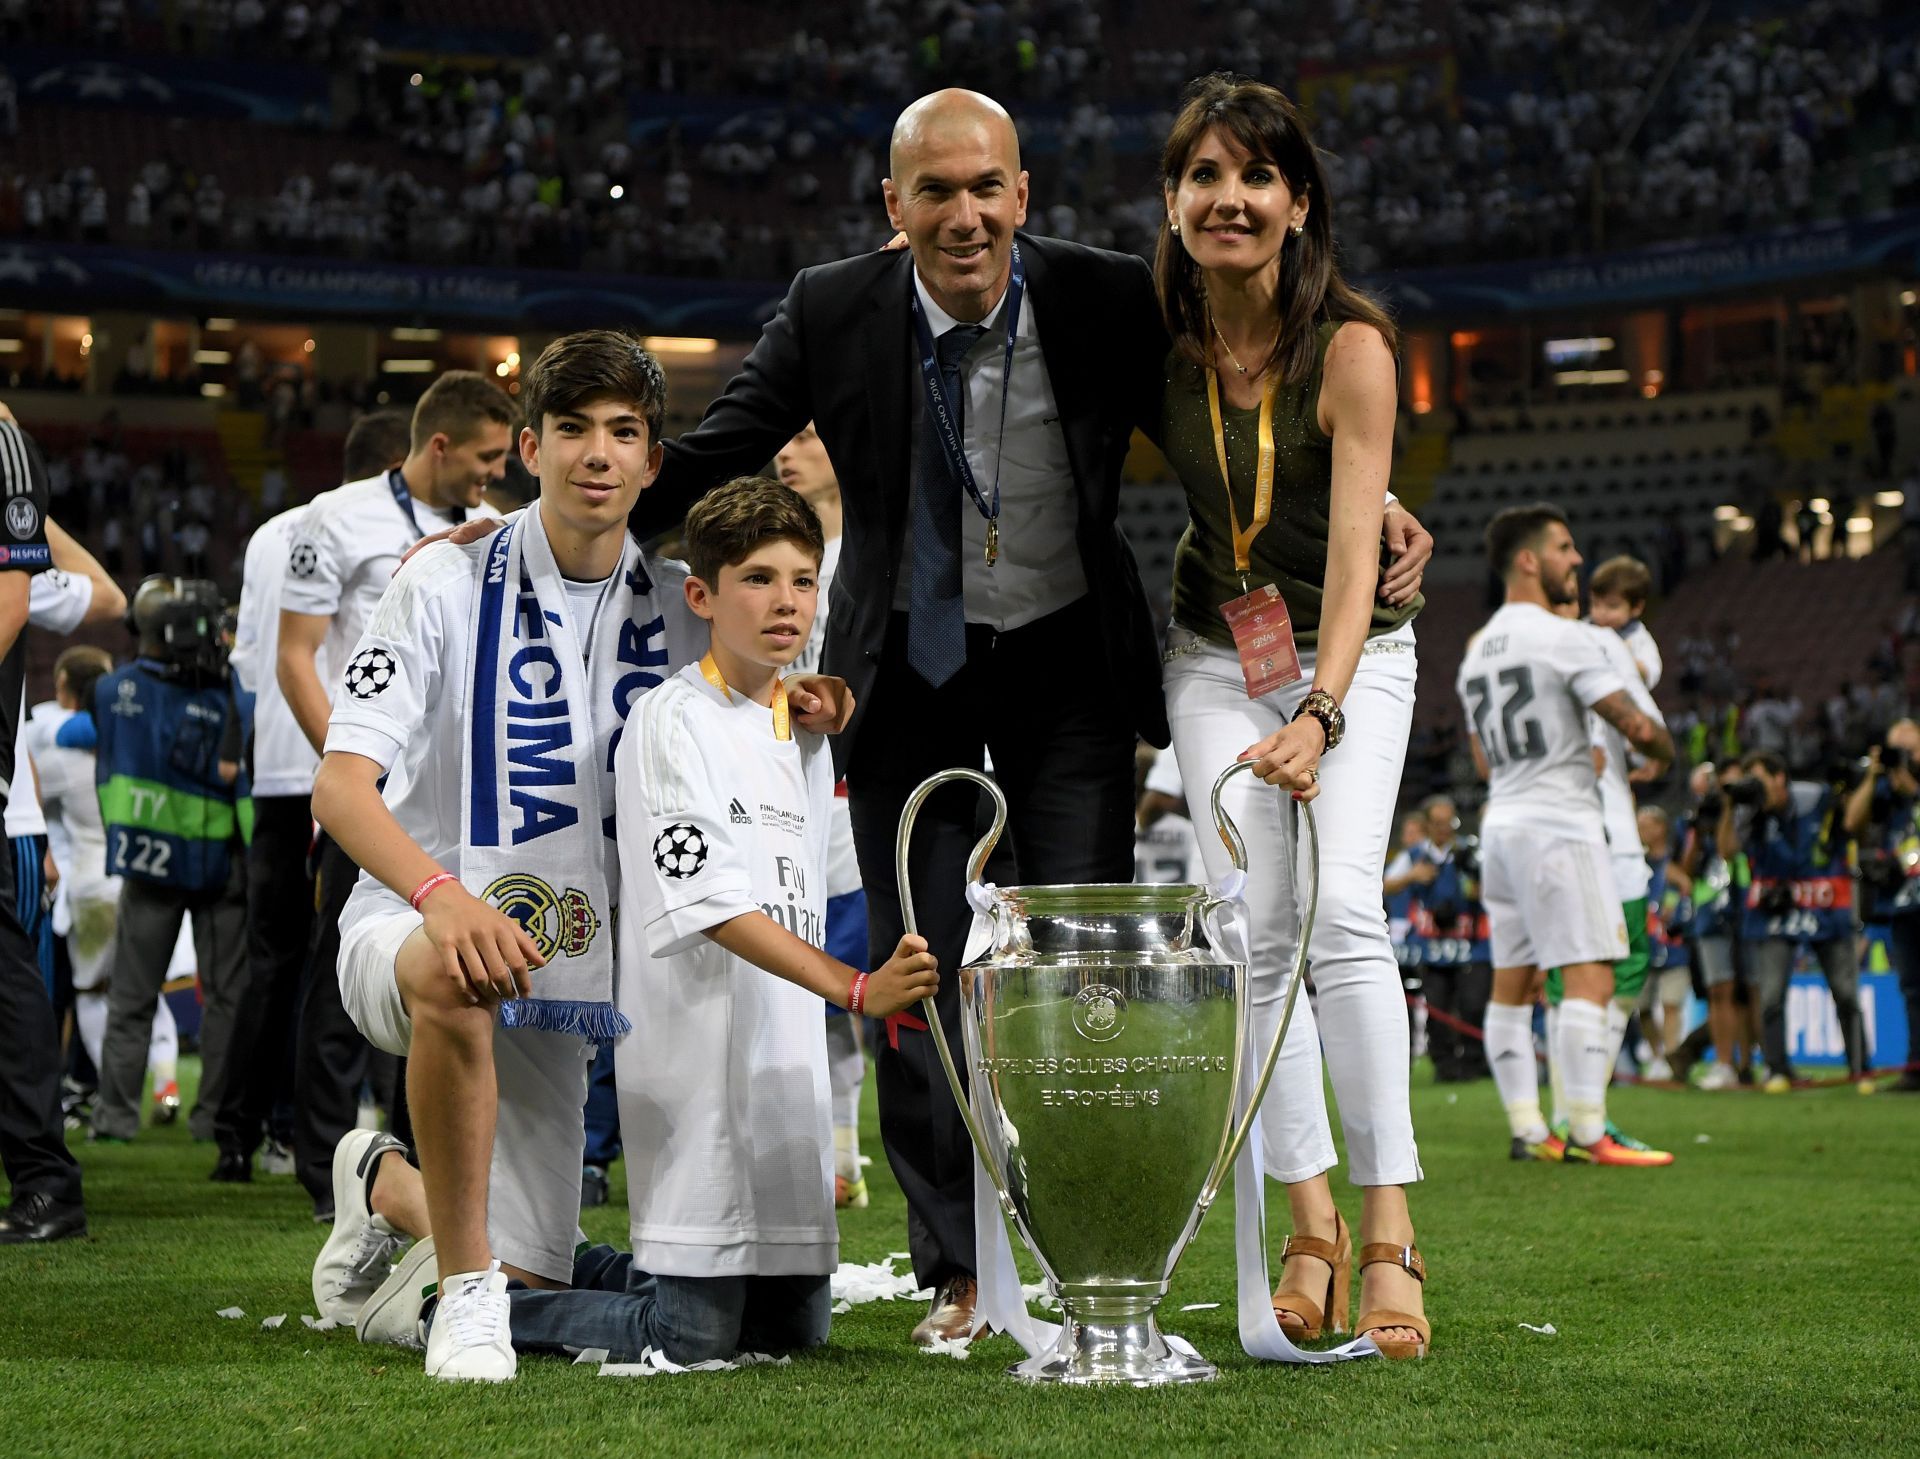 Zinedine Zidane has enjoyed great success in his managerial career as well.